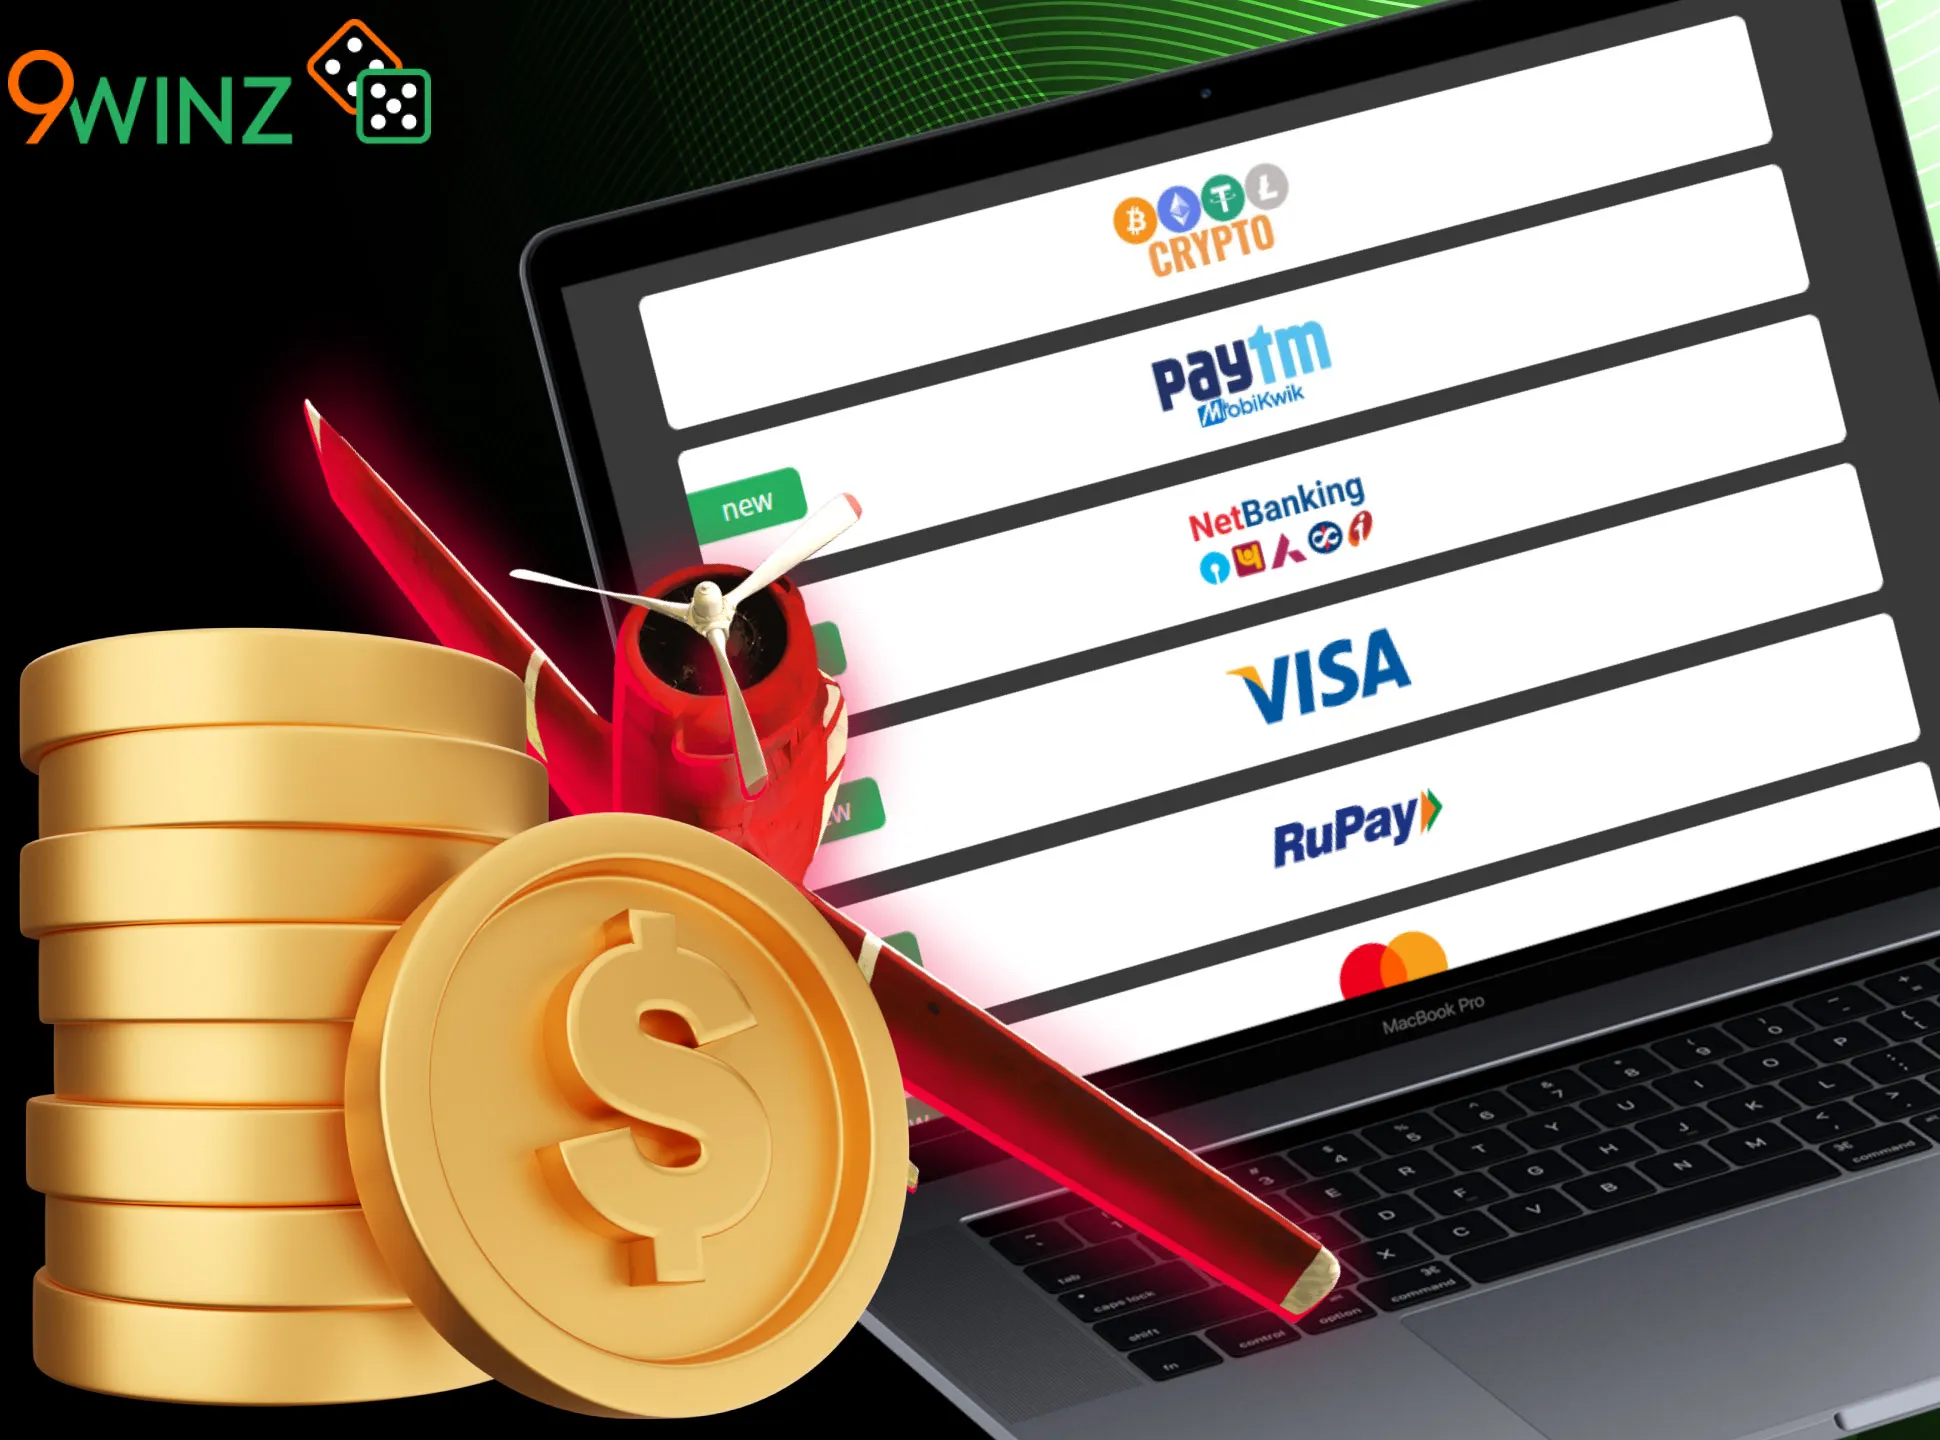 There are many various payment methods for Indians on 9winz.